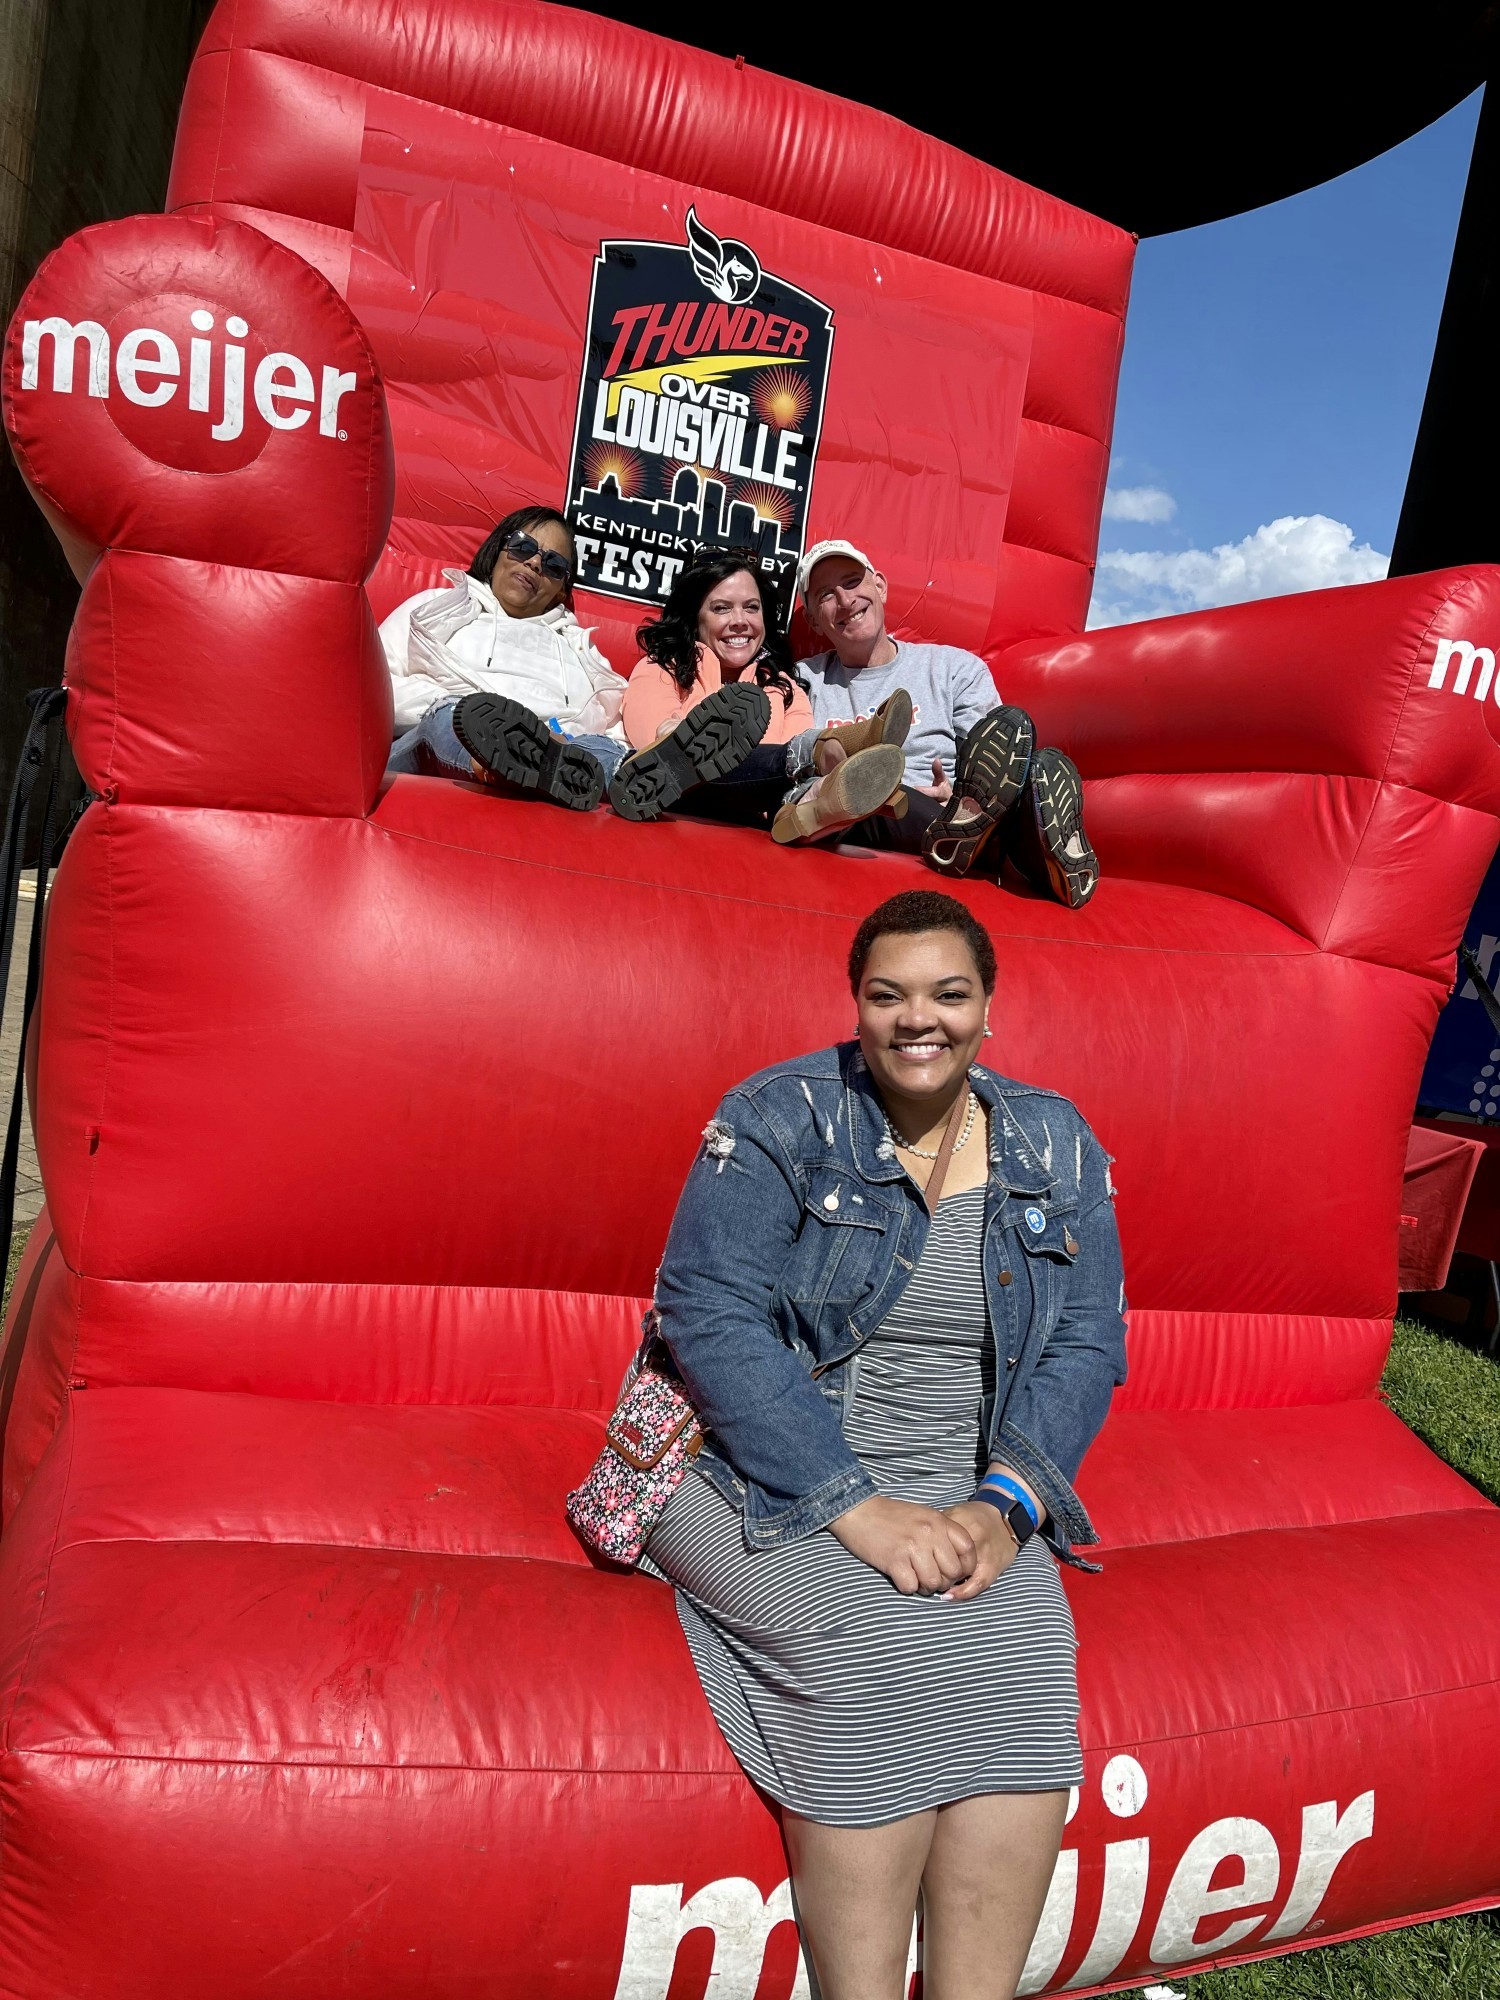 Team members strike a pose in the Meijer Family Fun Zone at Thunder Over Louisville.